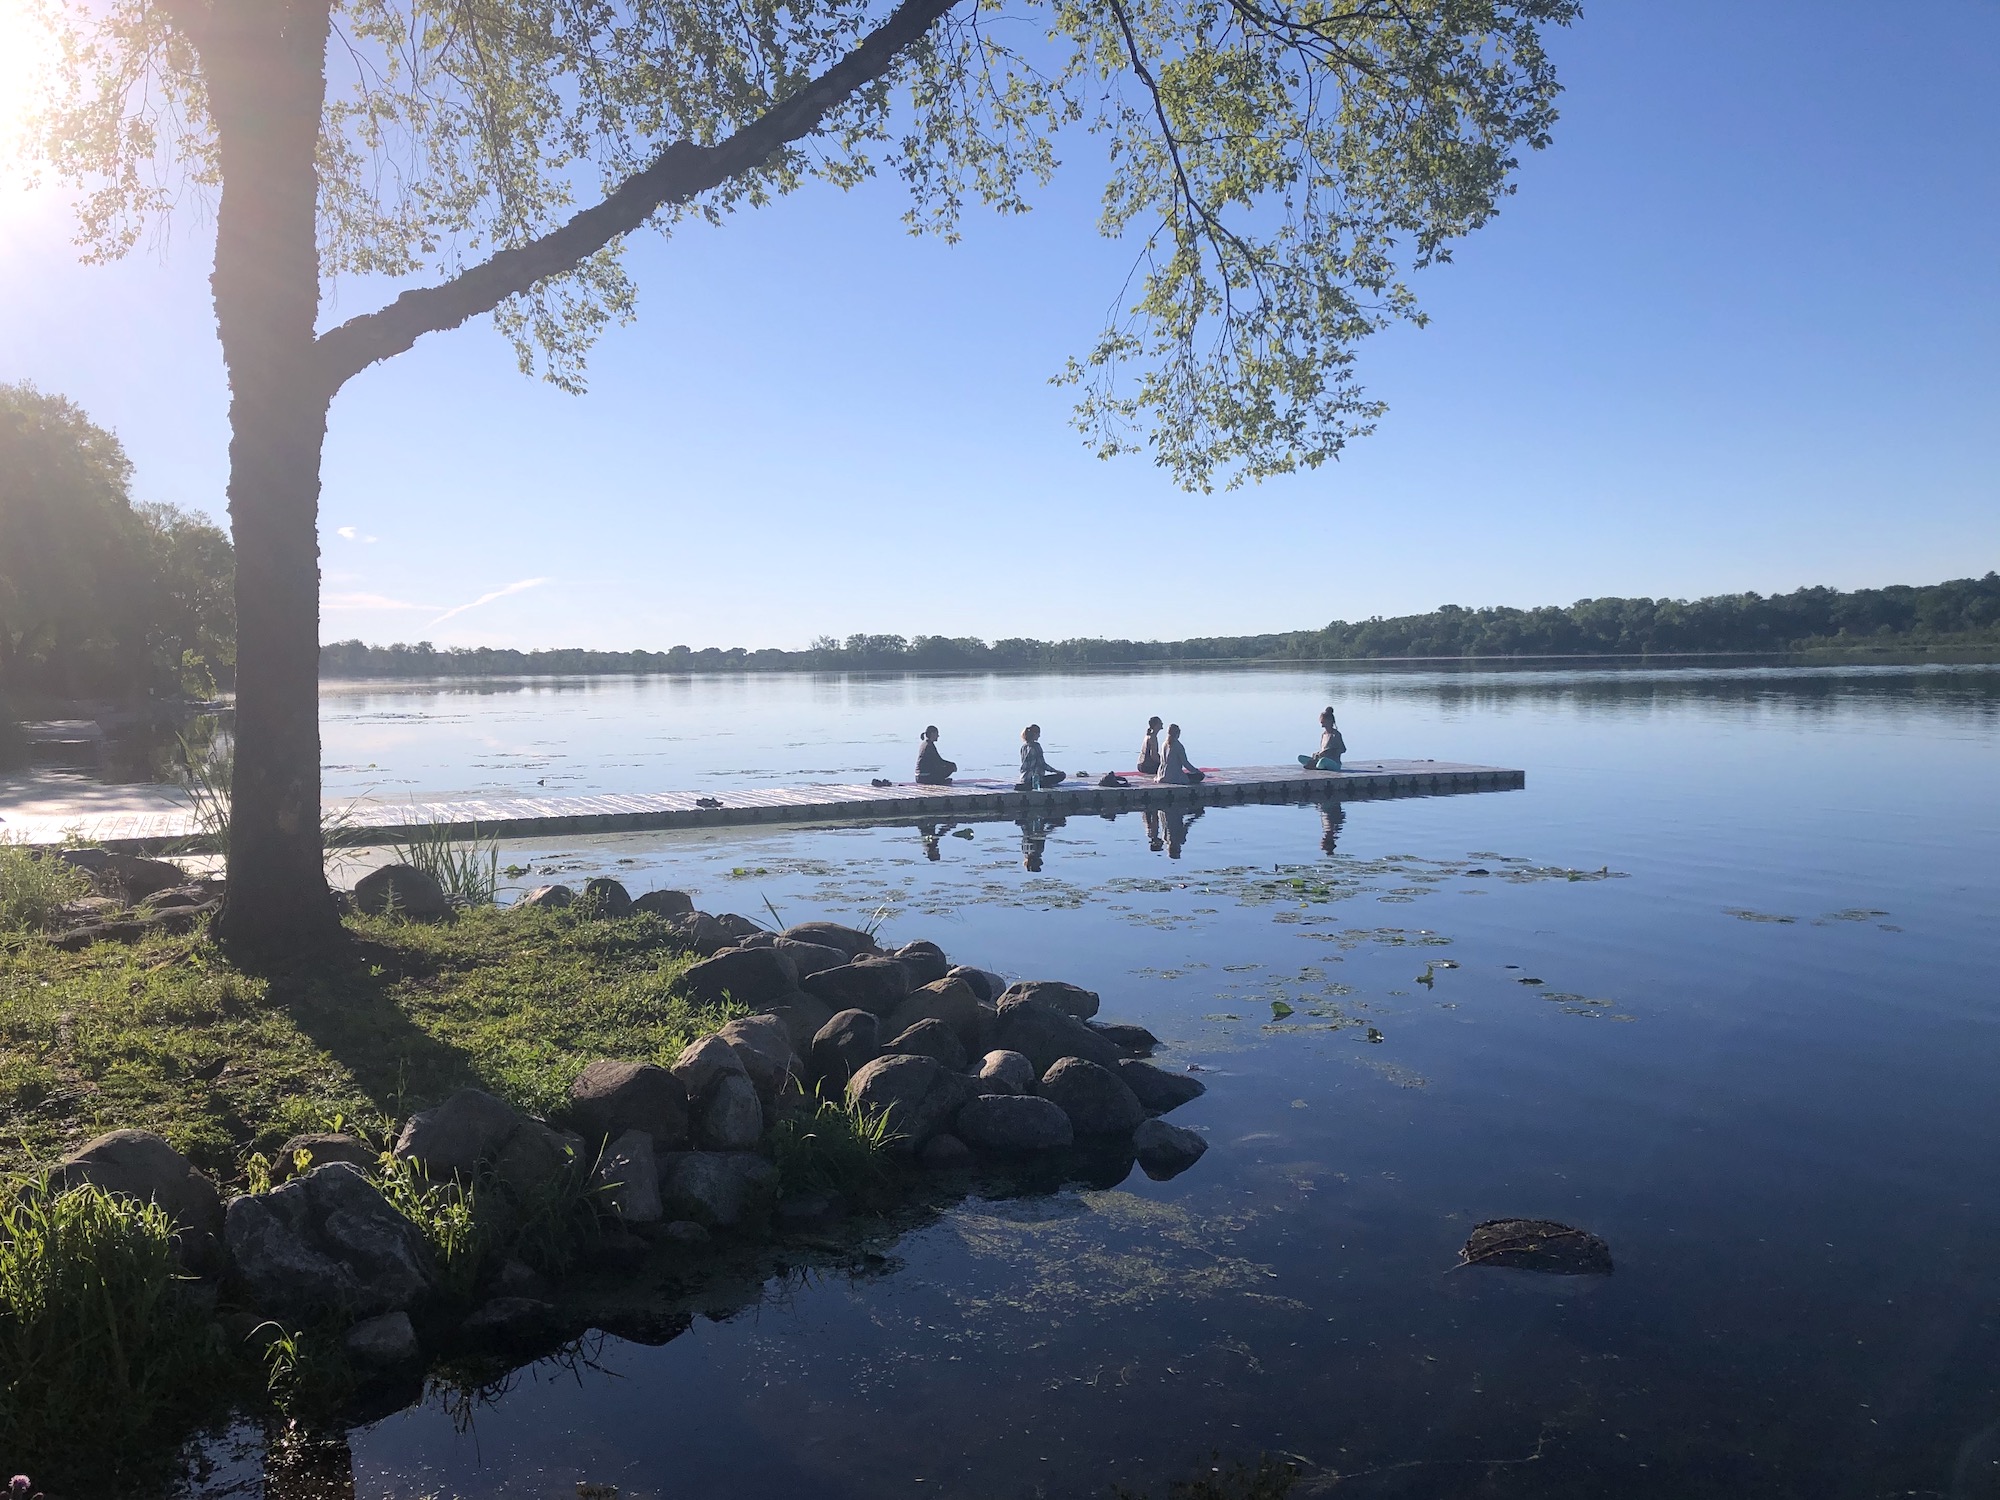 Yoga in the Park on shore of Lake Wingra on June 25, 2020.